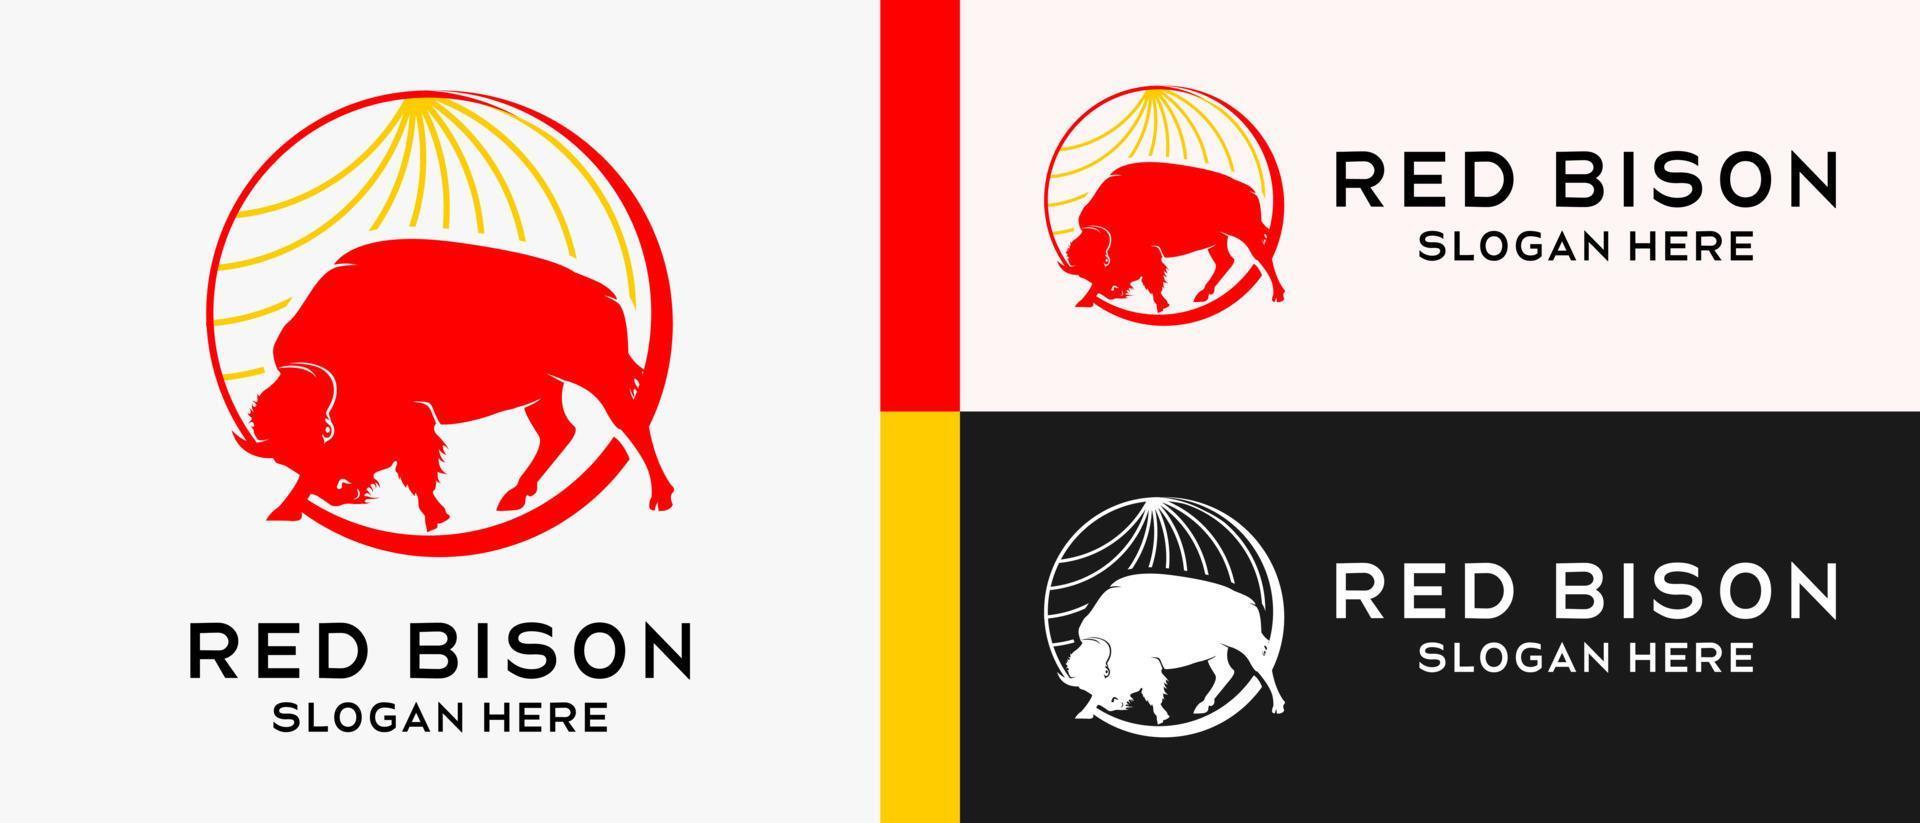 bison logo design template with red color silhouette in circle. premium vector